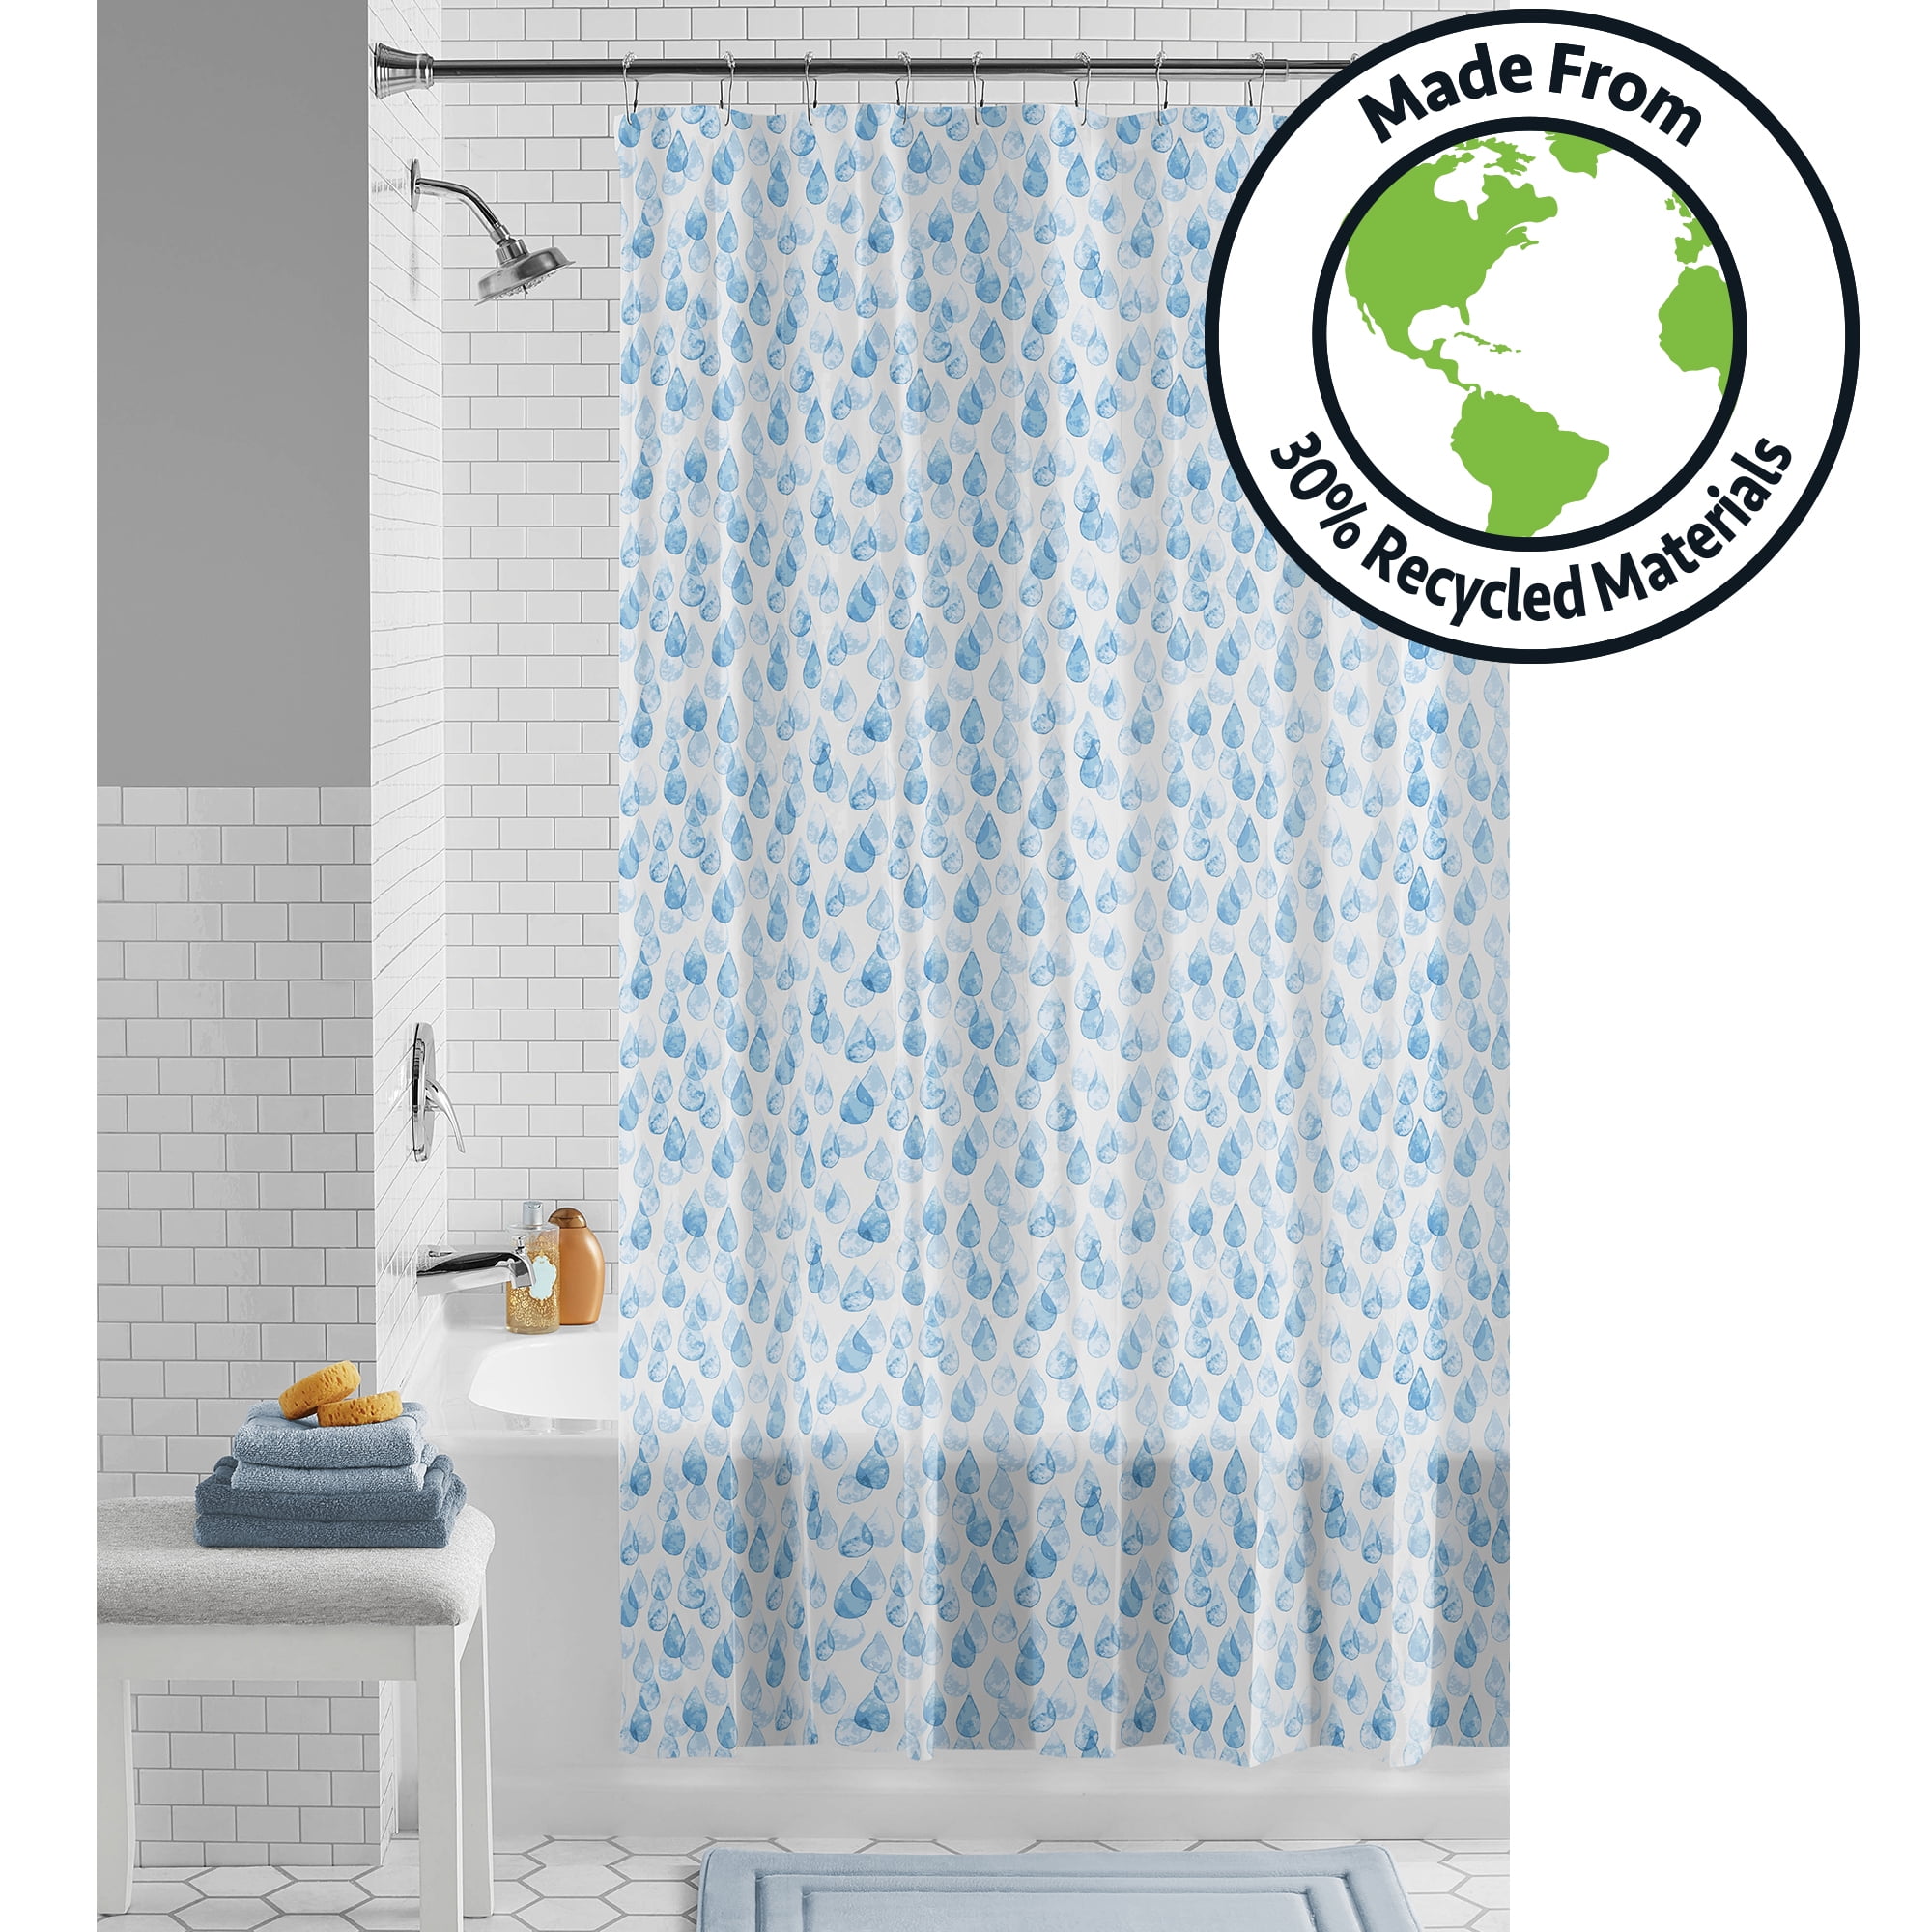 Mainstays 13-Piece Water Drops Eco-friendly Waterproof PEVA Shower Curtain  with Hooks Set, Made from 30% Post-Consumer Recycled Materials, Blue